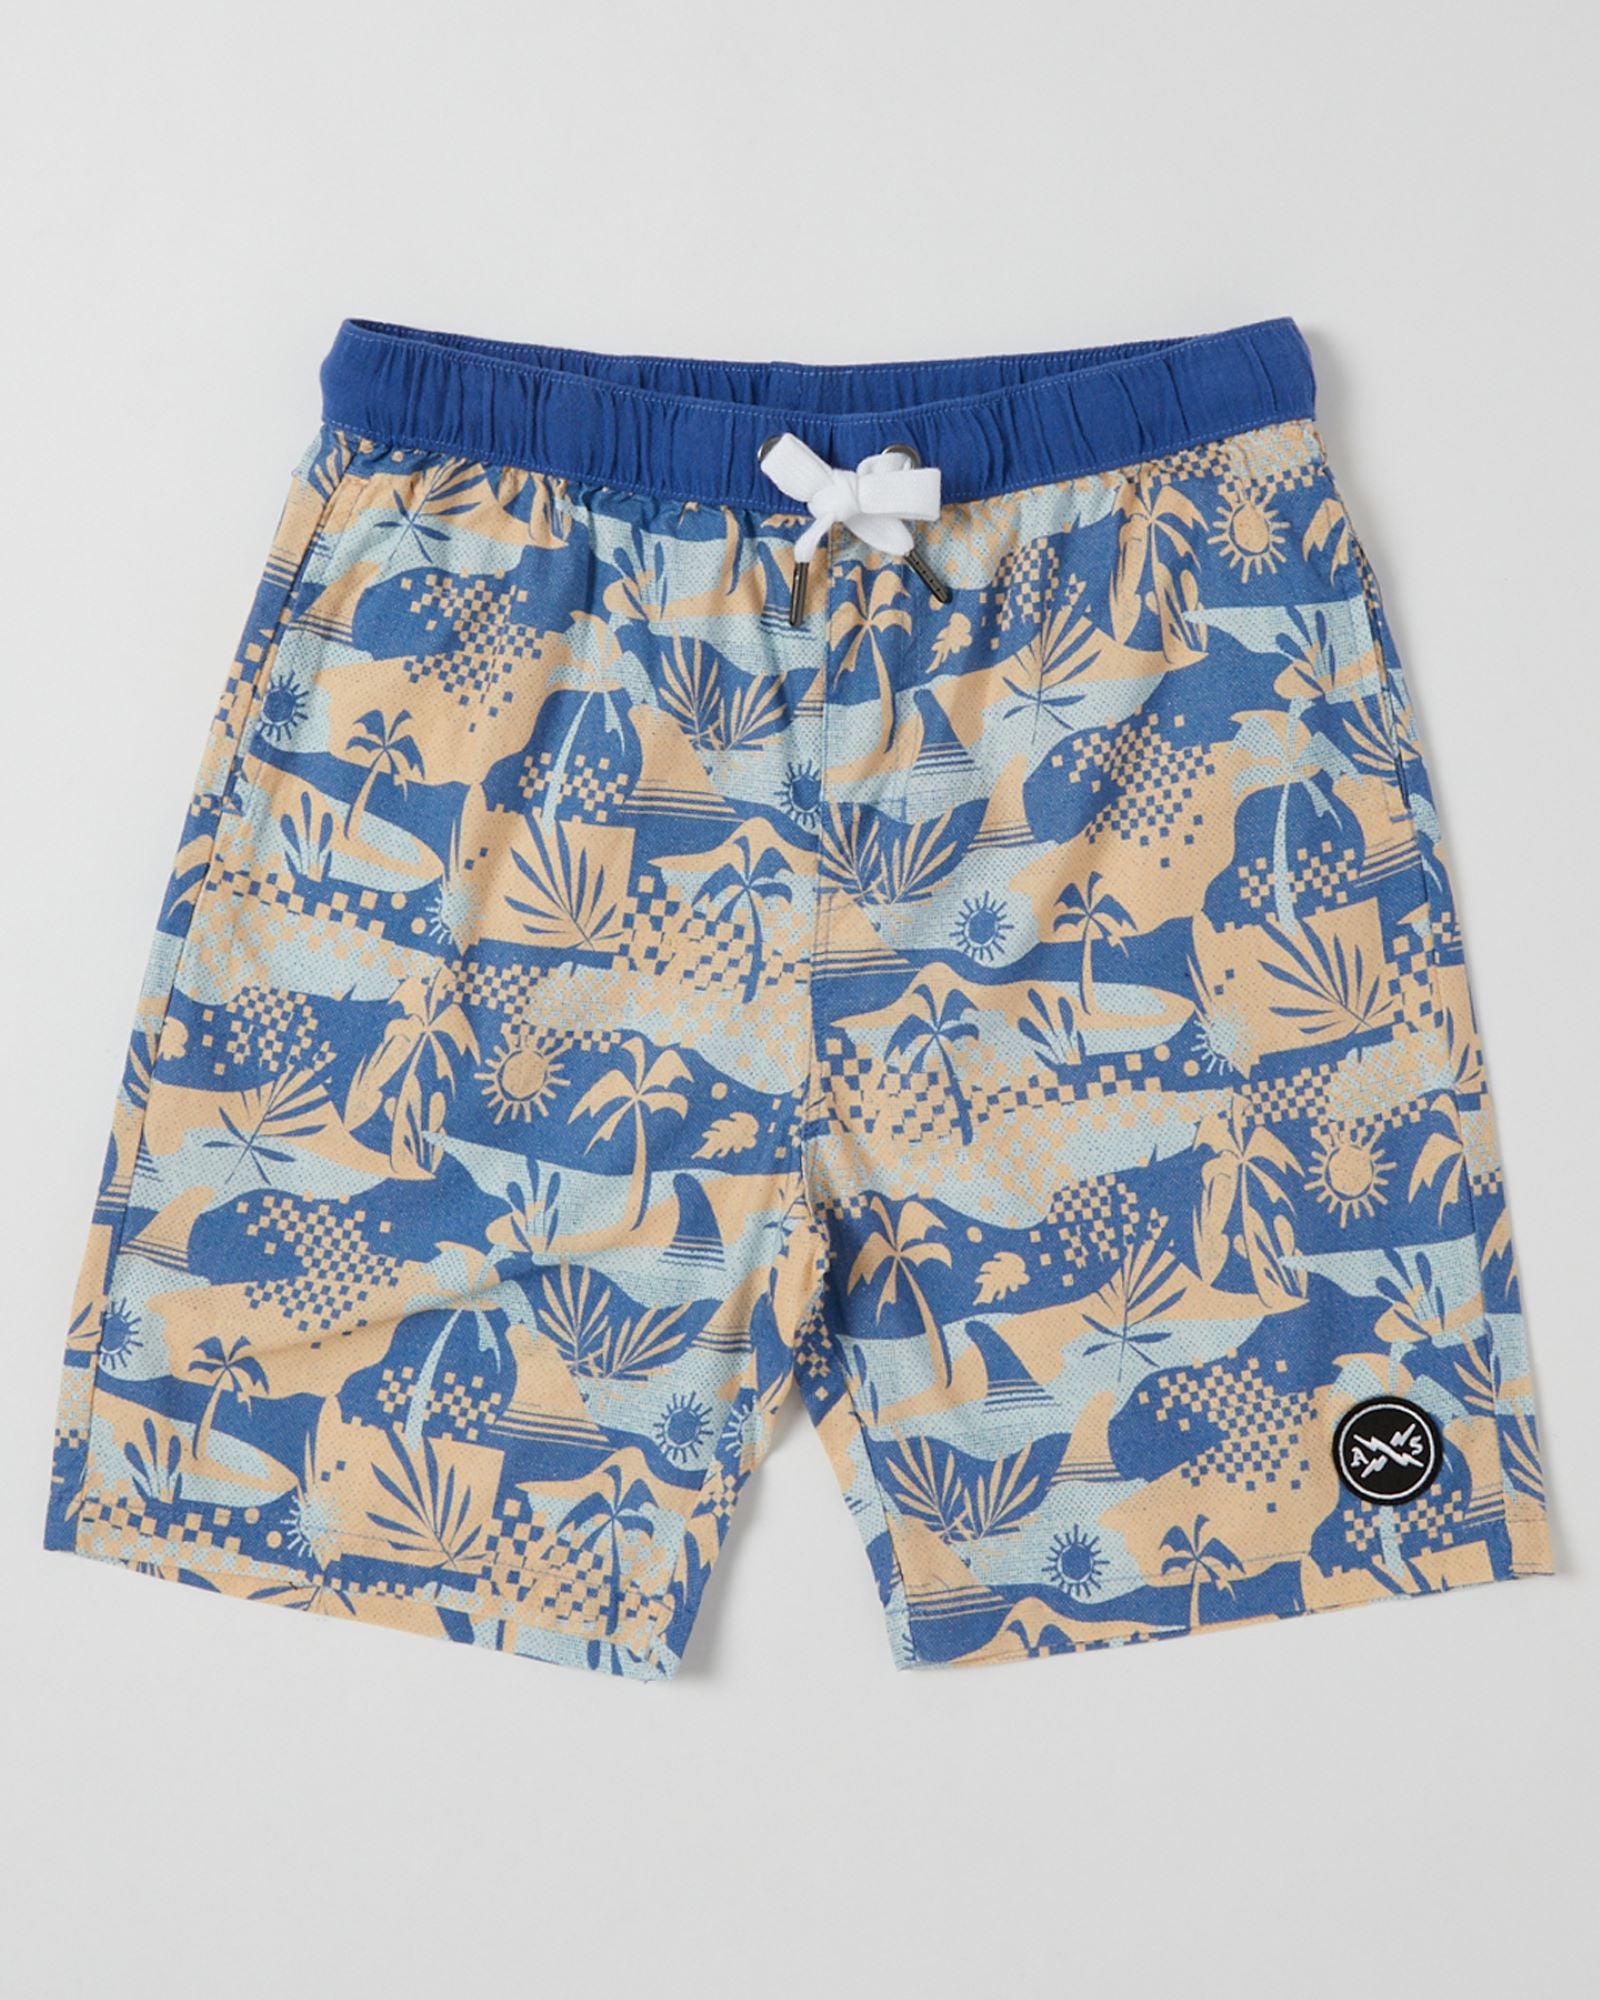 Alphabet Soup Kids Poolside Shorts designed for boys aged 2 to 7, offer a comfortable regular fit made of 100% cotton, featuring an adjustable draw cord, elastic waist, faux fly, and twin pockets. The vintage wash provides a stylish tropical print in three exciting colors.